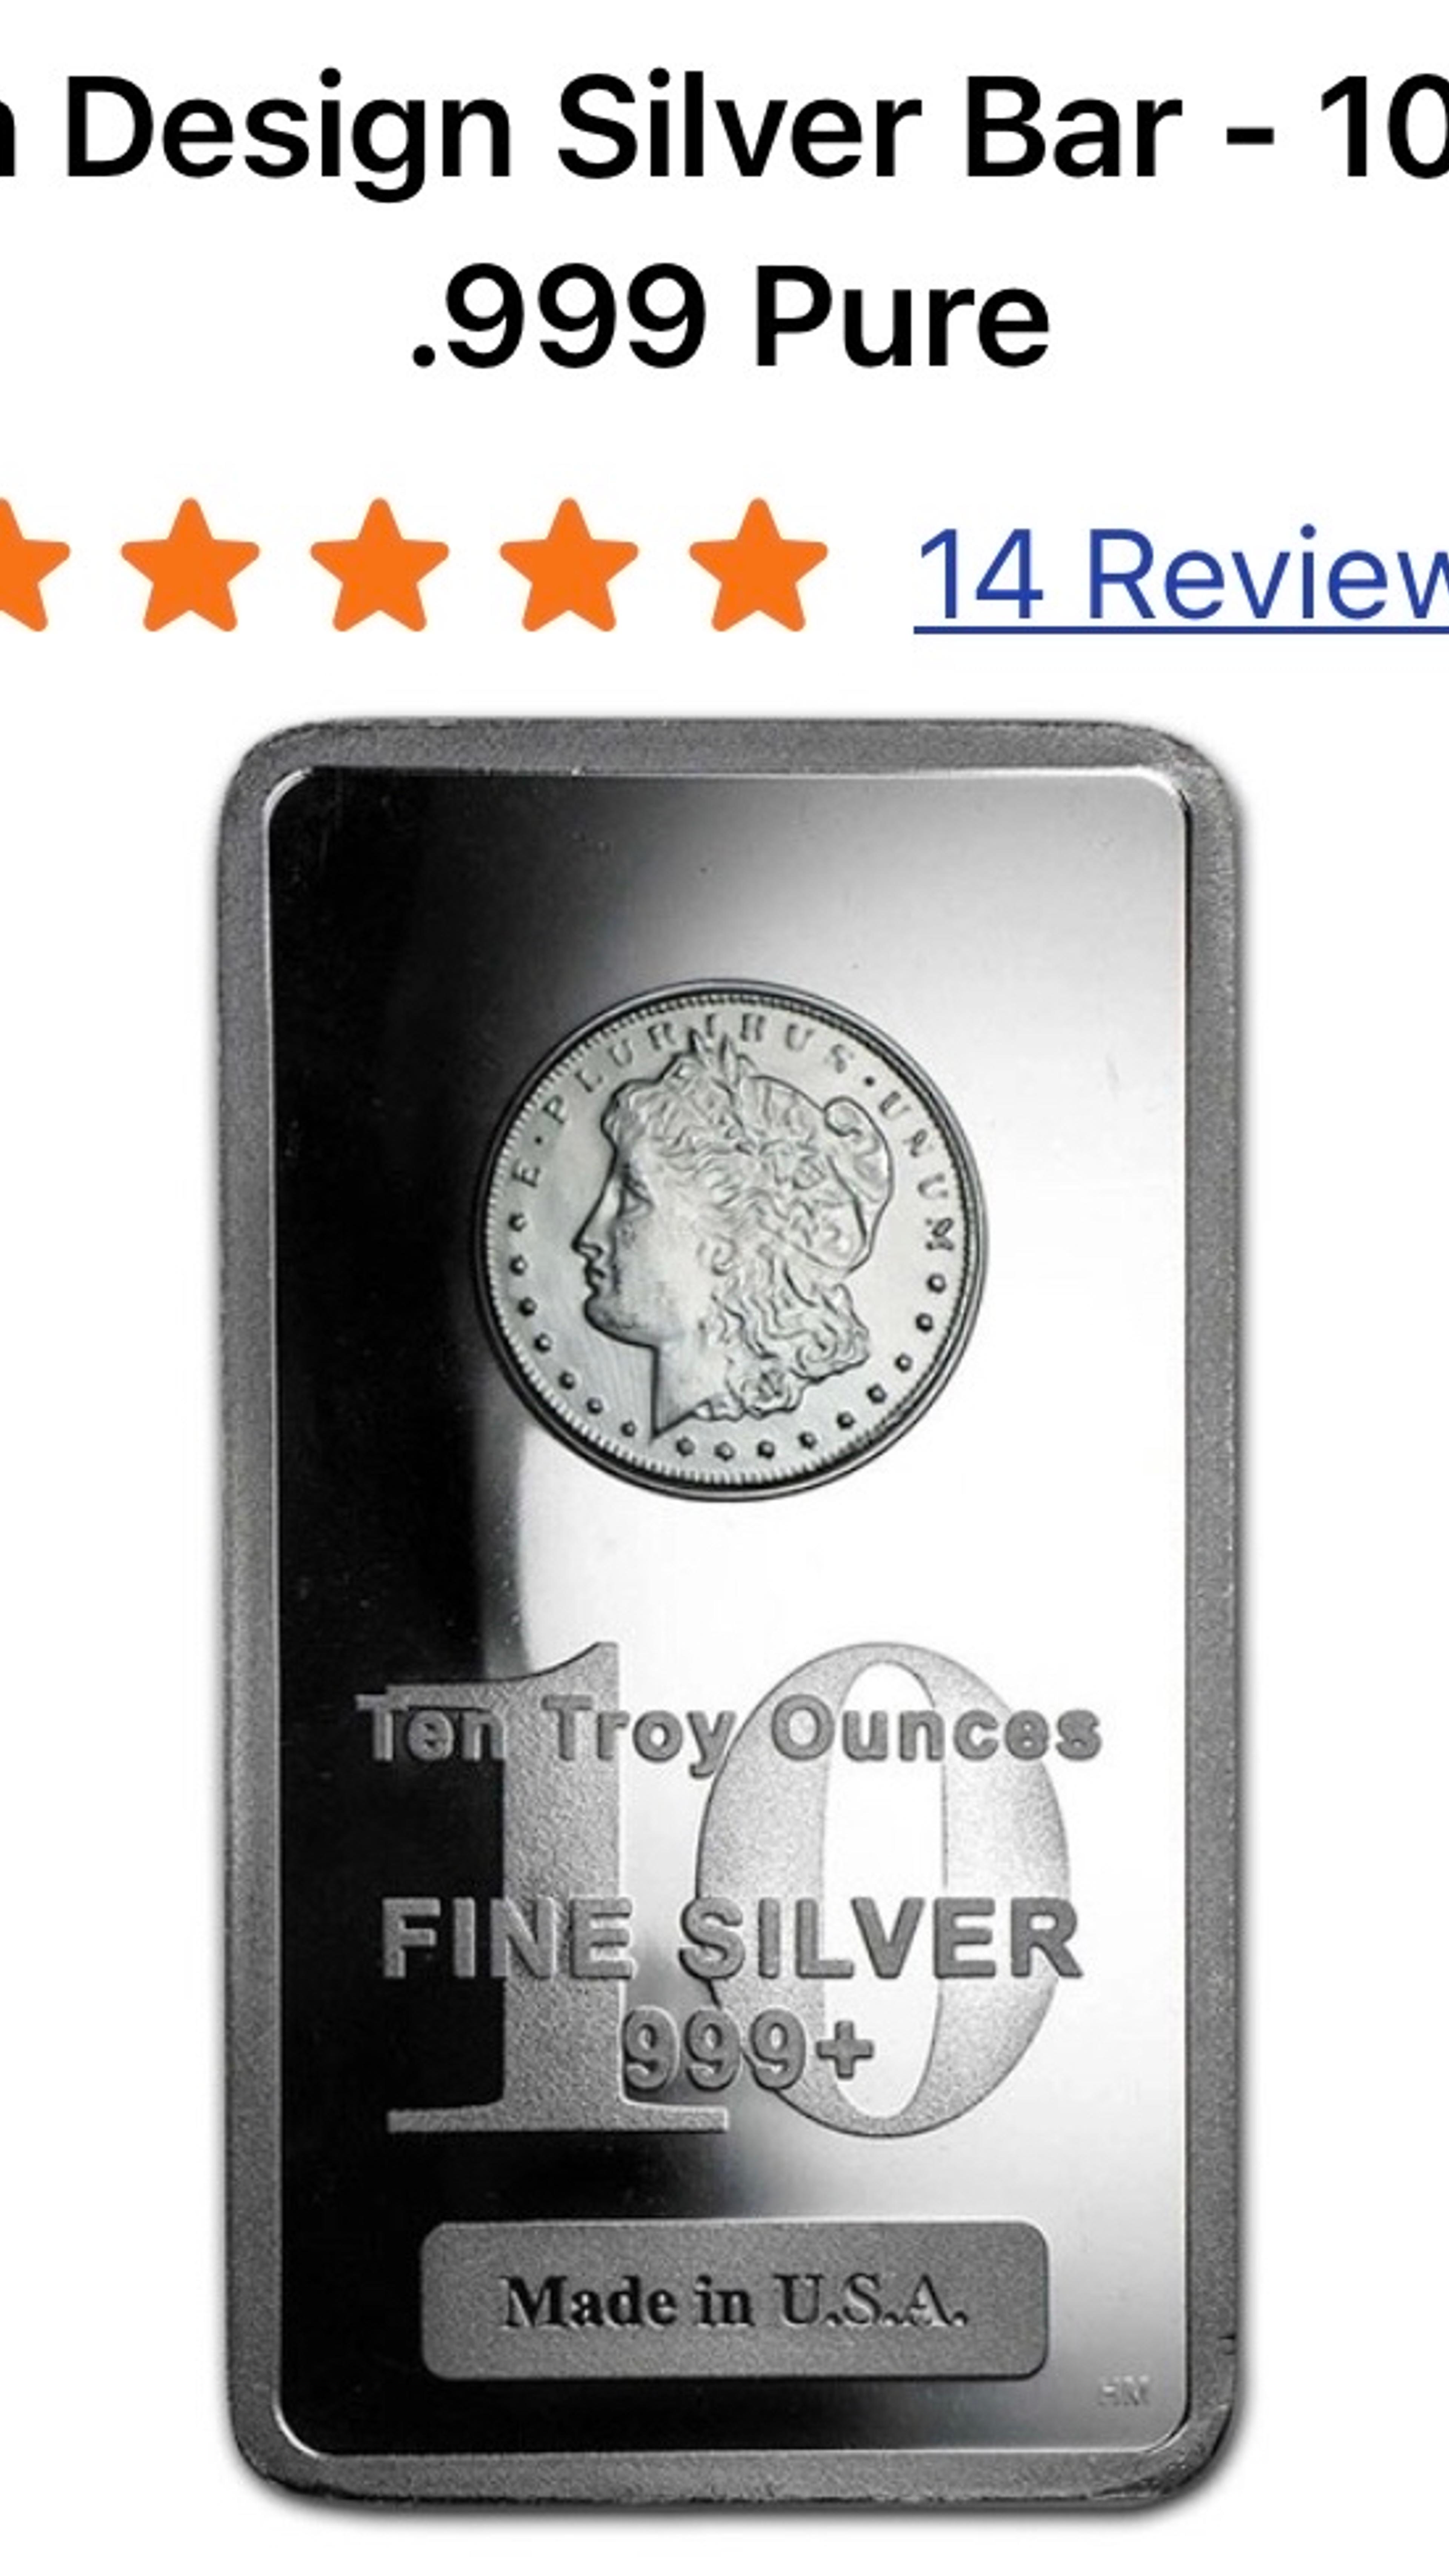 Preview image for the show titled "Mystery wheel- 10 oz pure silver Morgan bar " at Today @ 8:10 PM